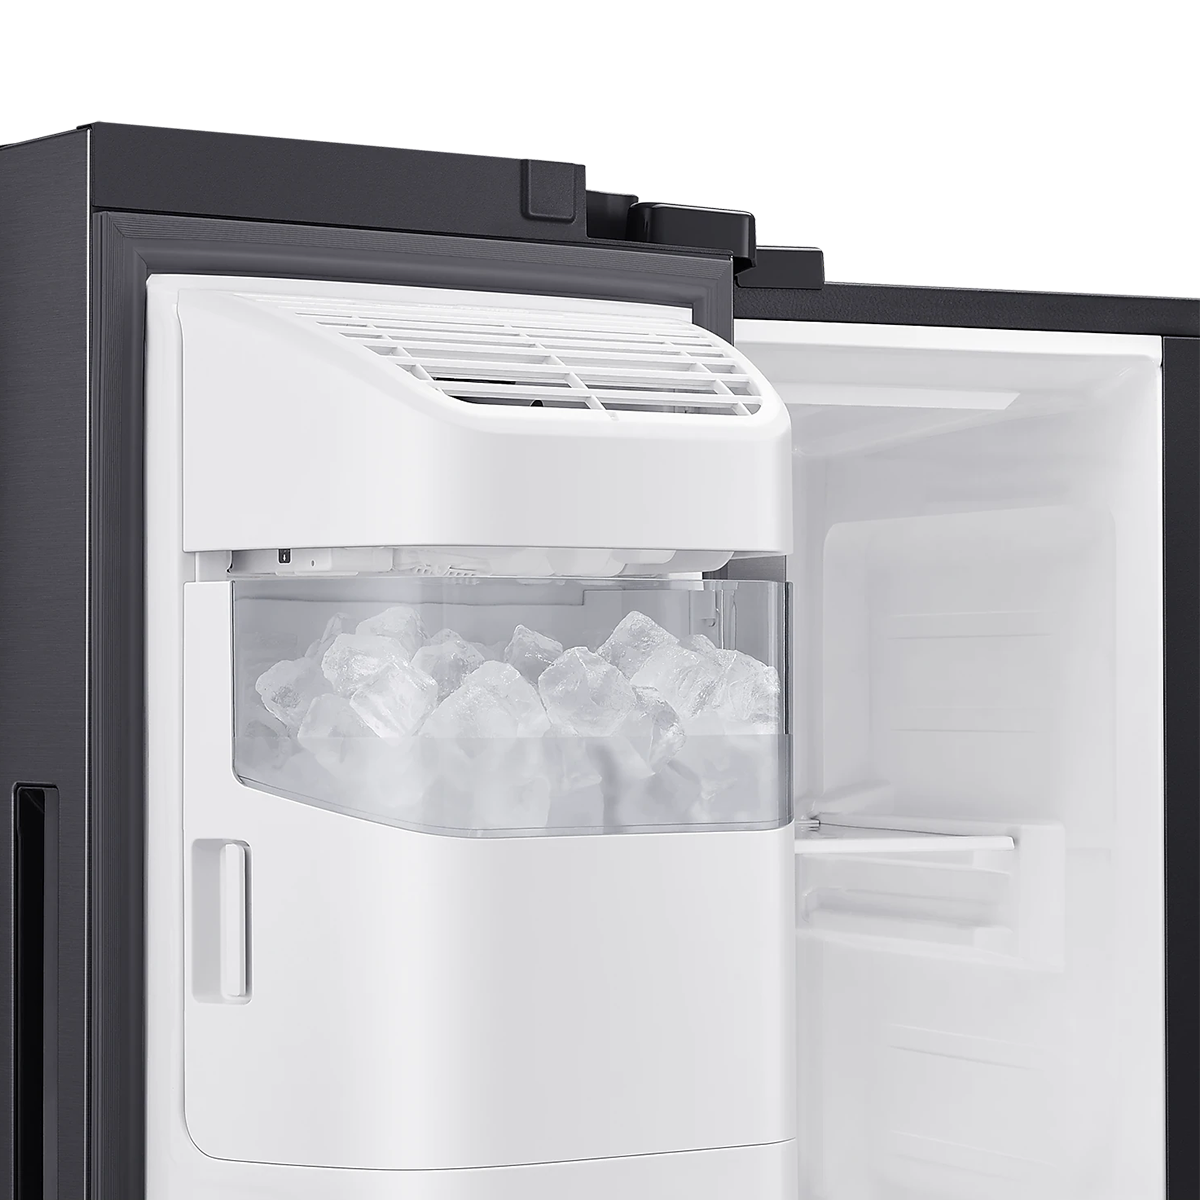 Samsung 660L Side by Side Refrigerator with Space Max